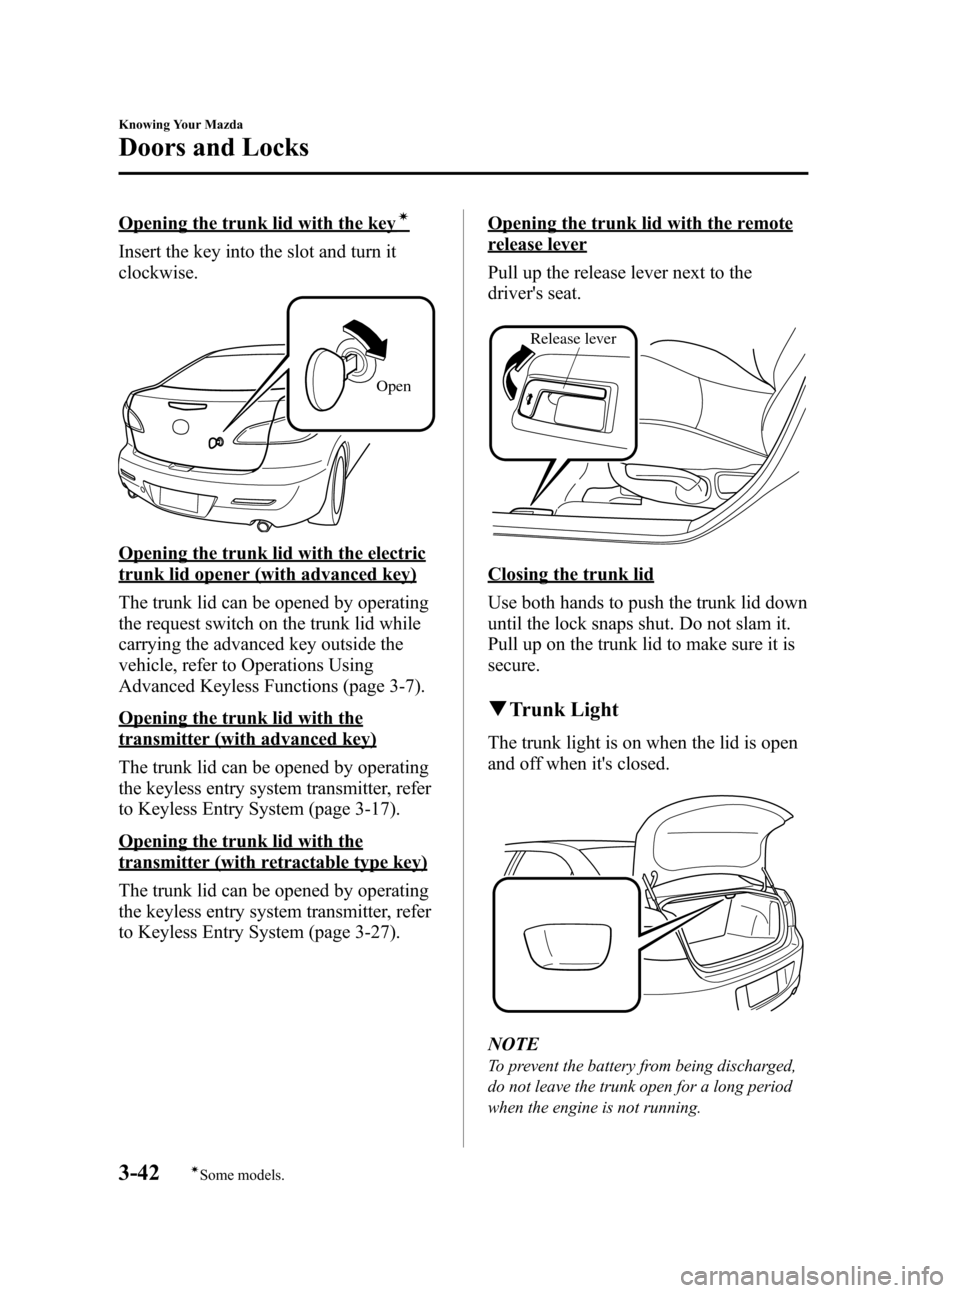 MAZDA MODEL 3 HATCHBACK 2011  Owners Manual (in English) Black plate (118,1)
Opening the trunk lid with the keyí
Insert the key into the slot and turn it
clockwise.
Open
Opening the trunk lid with the electric
trunk lid opener (with advanced key)
The trunk